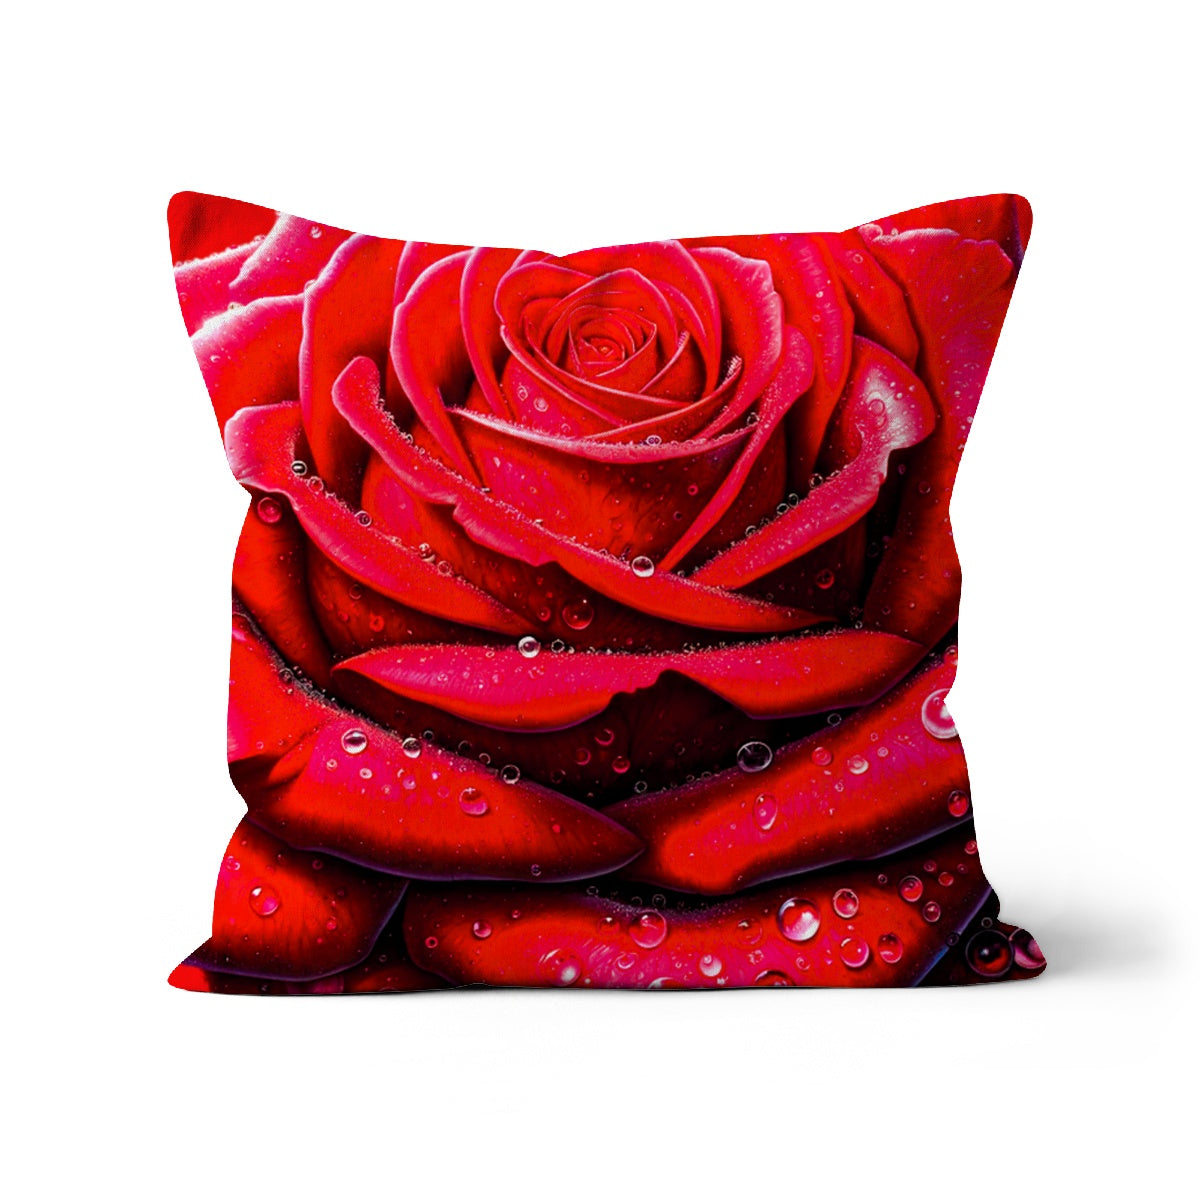 Red Rose Waterdrops Cushion